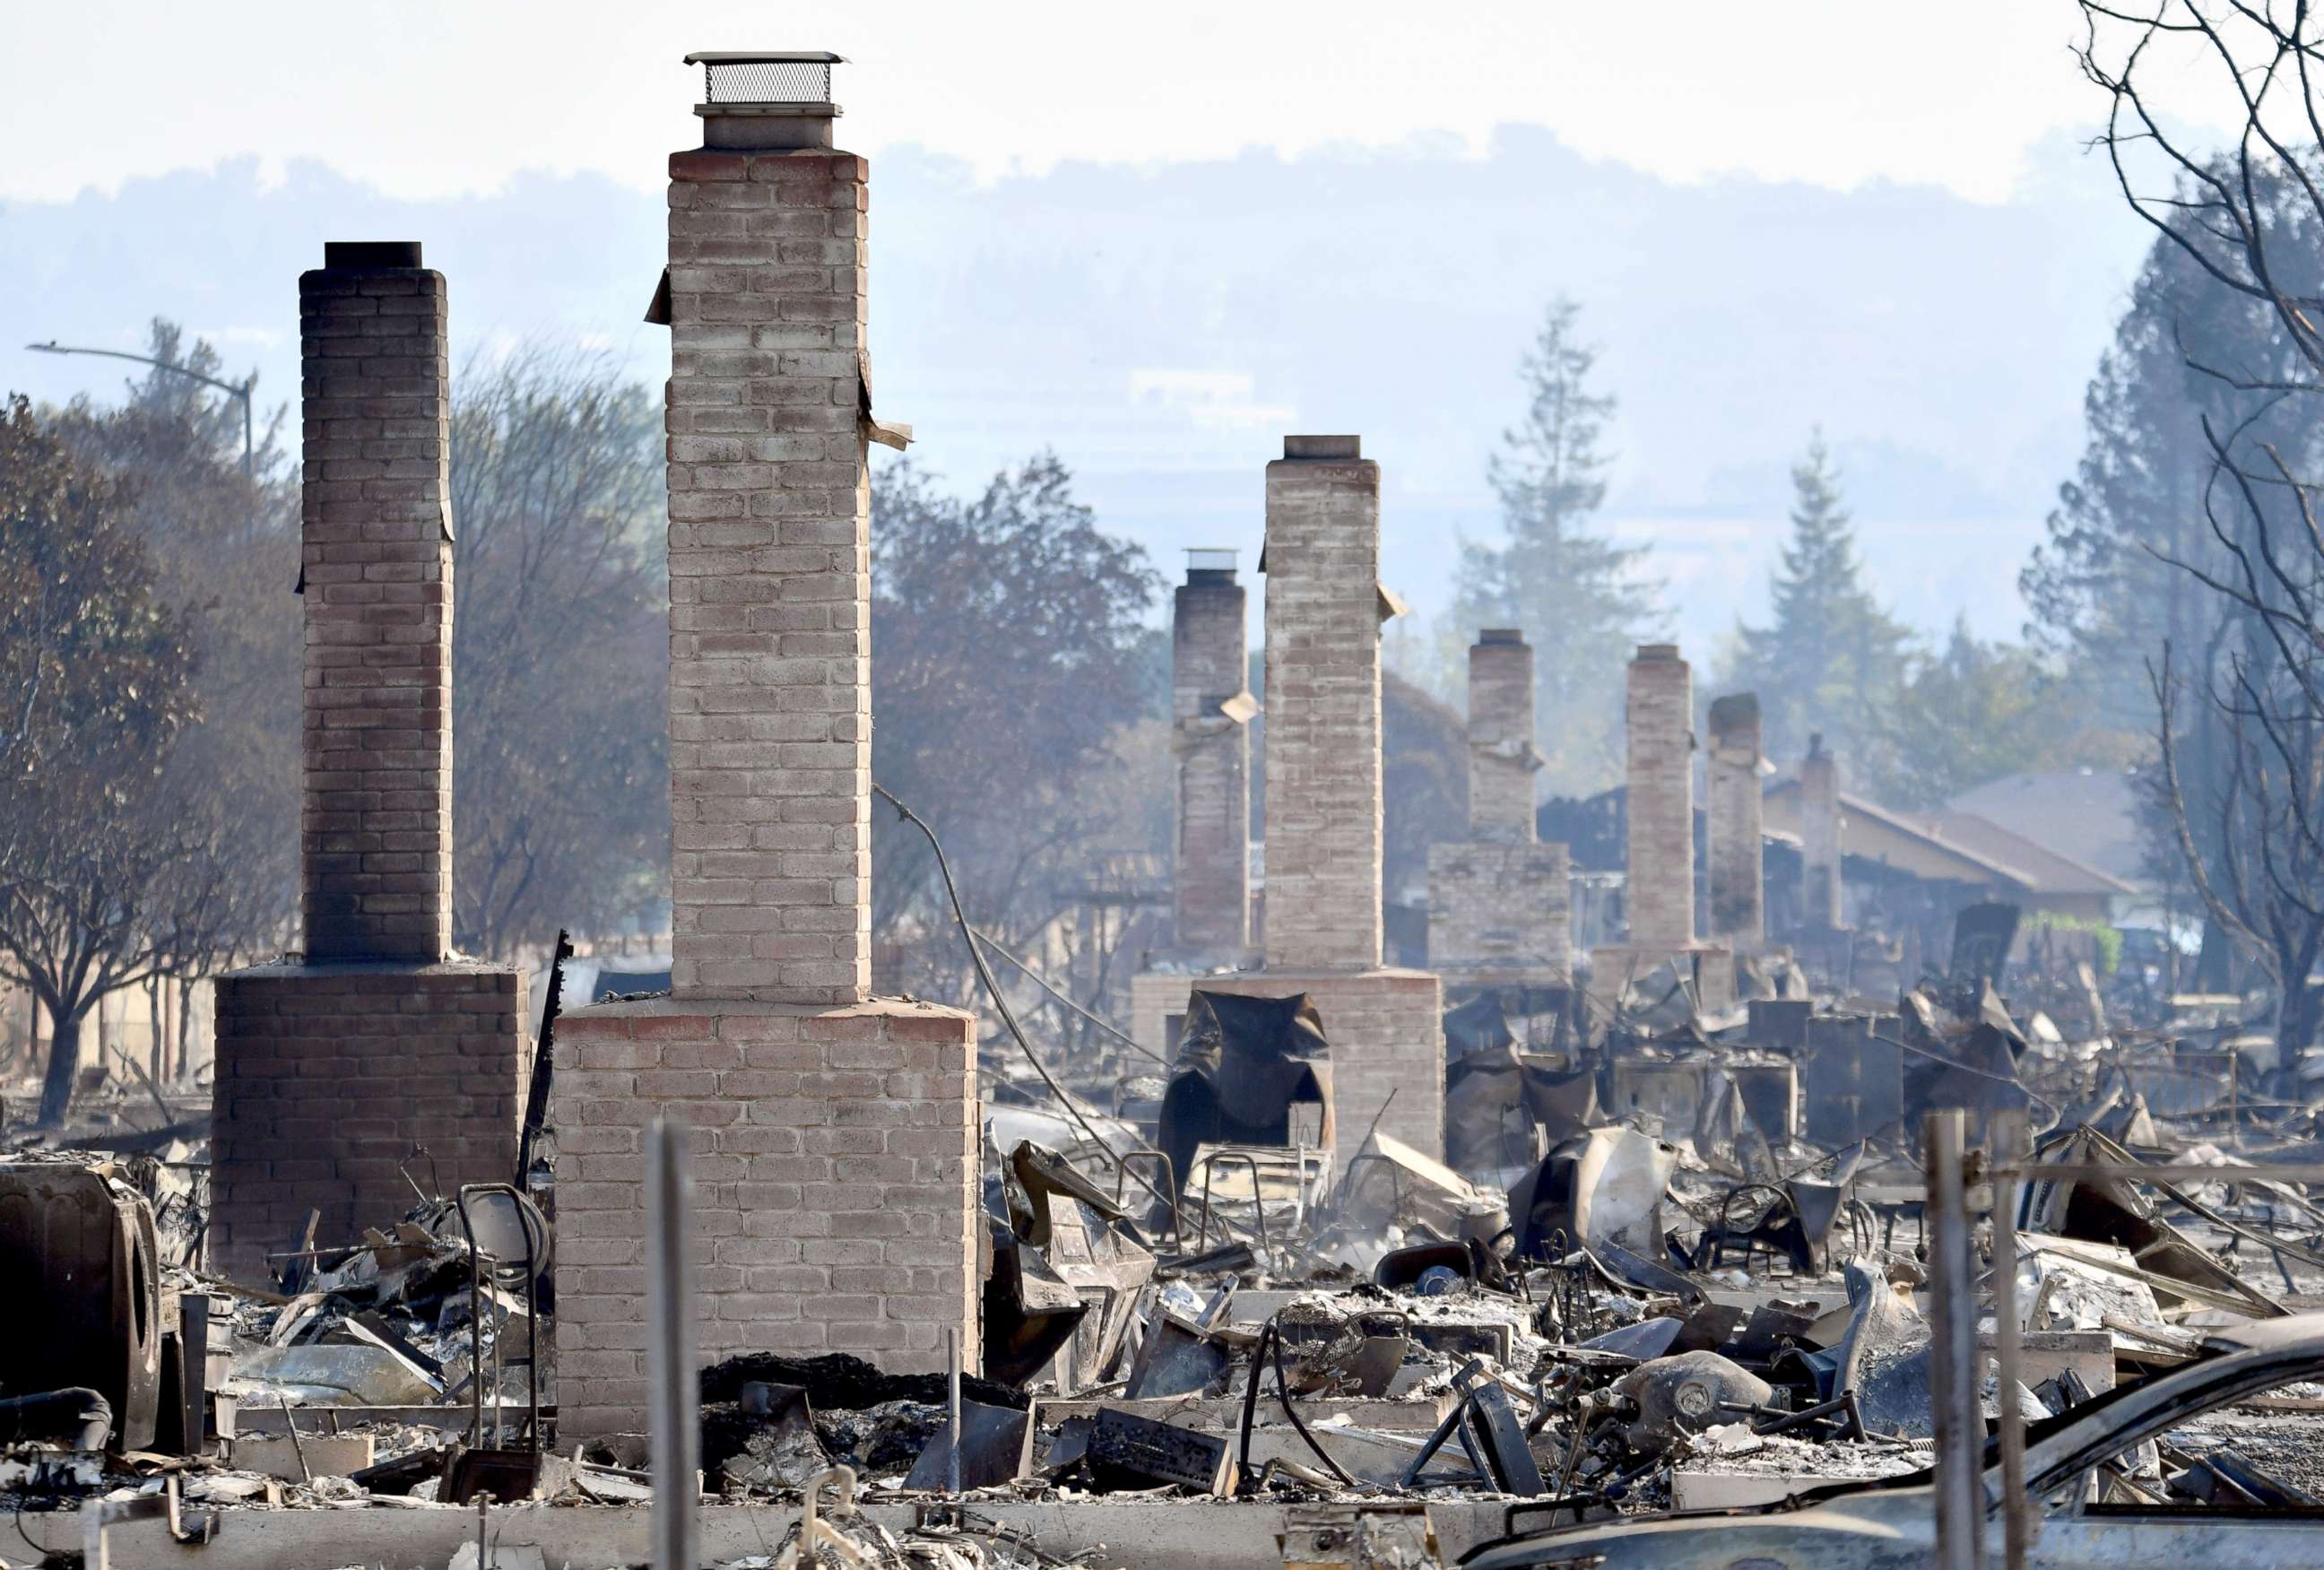 PHOTO: Chimneys are all that remain standing amidst a swath of burned out properties in Santa Rosa, Calif., Oct. 12, 2017.
